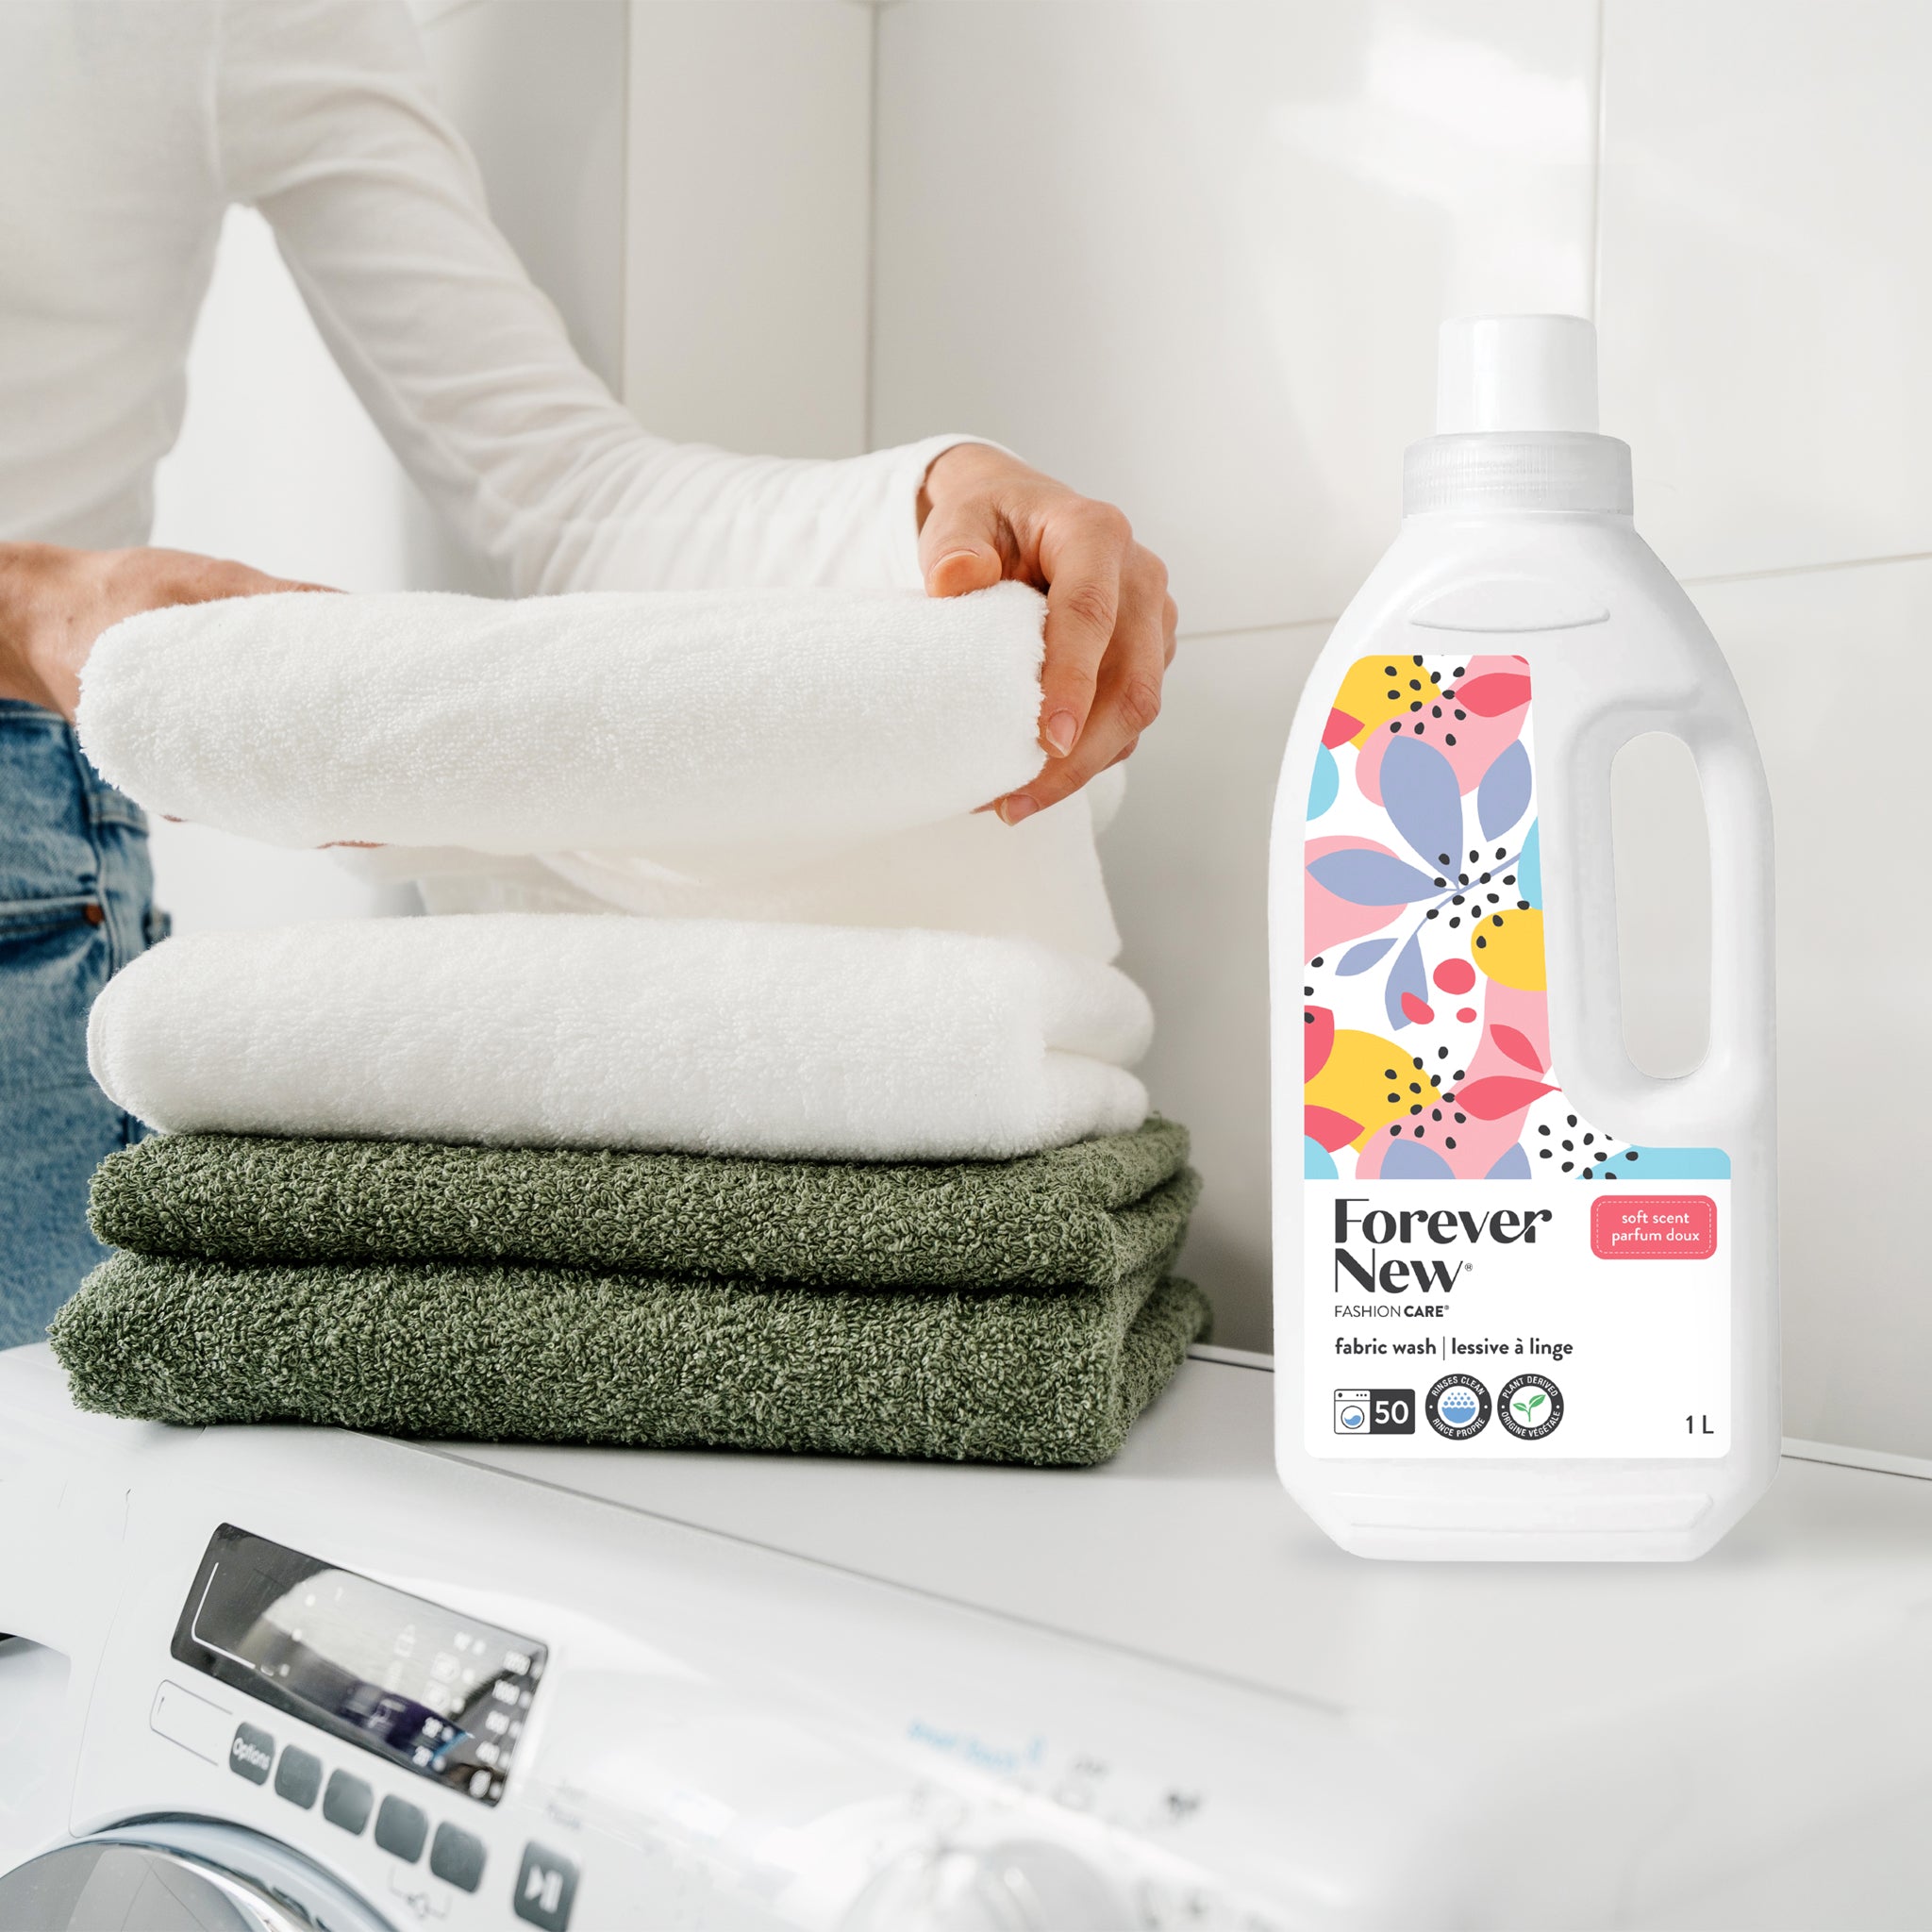 Fashion Care Forever New - Unscented & Soft Scented Fabric Washes – Forever  New Fashion Care